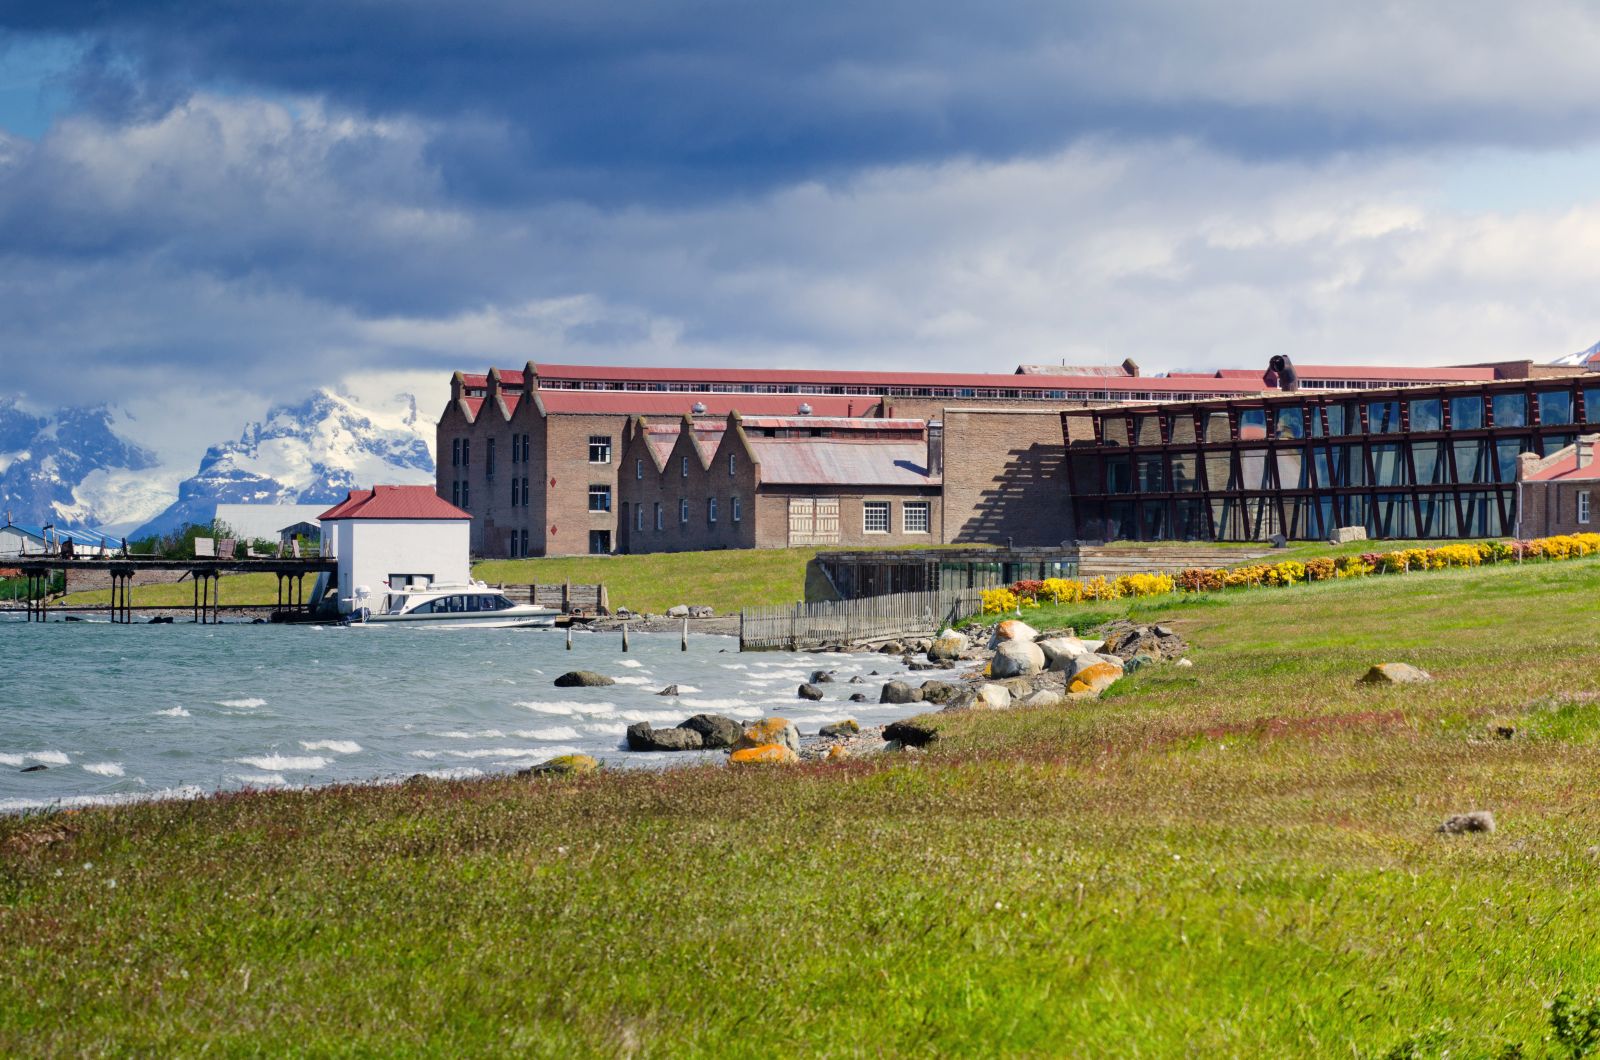 View of the Singular Patagonia on the shores of the Senoret Channel in Puerto Natales, Chile